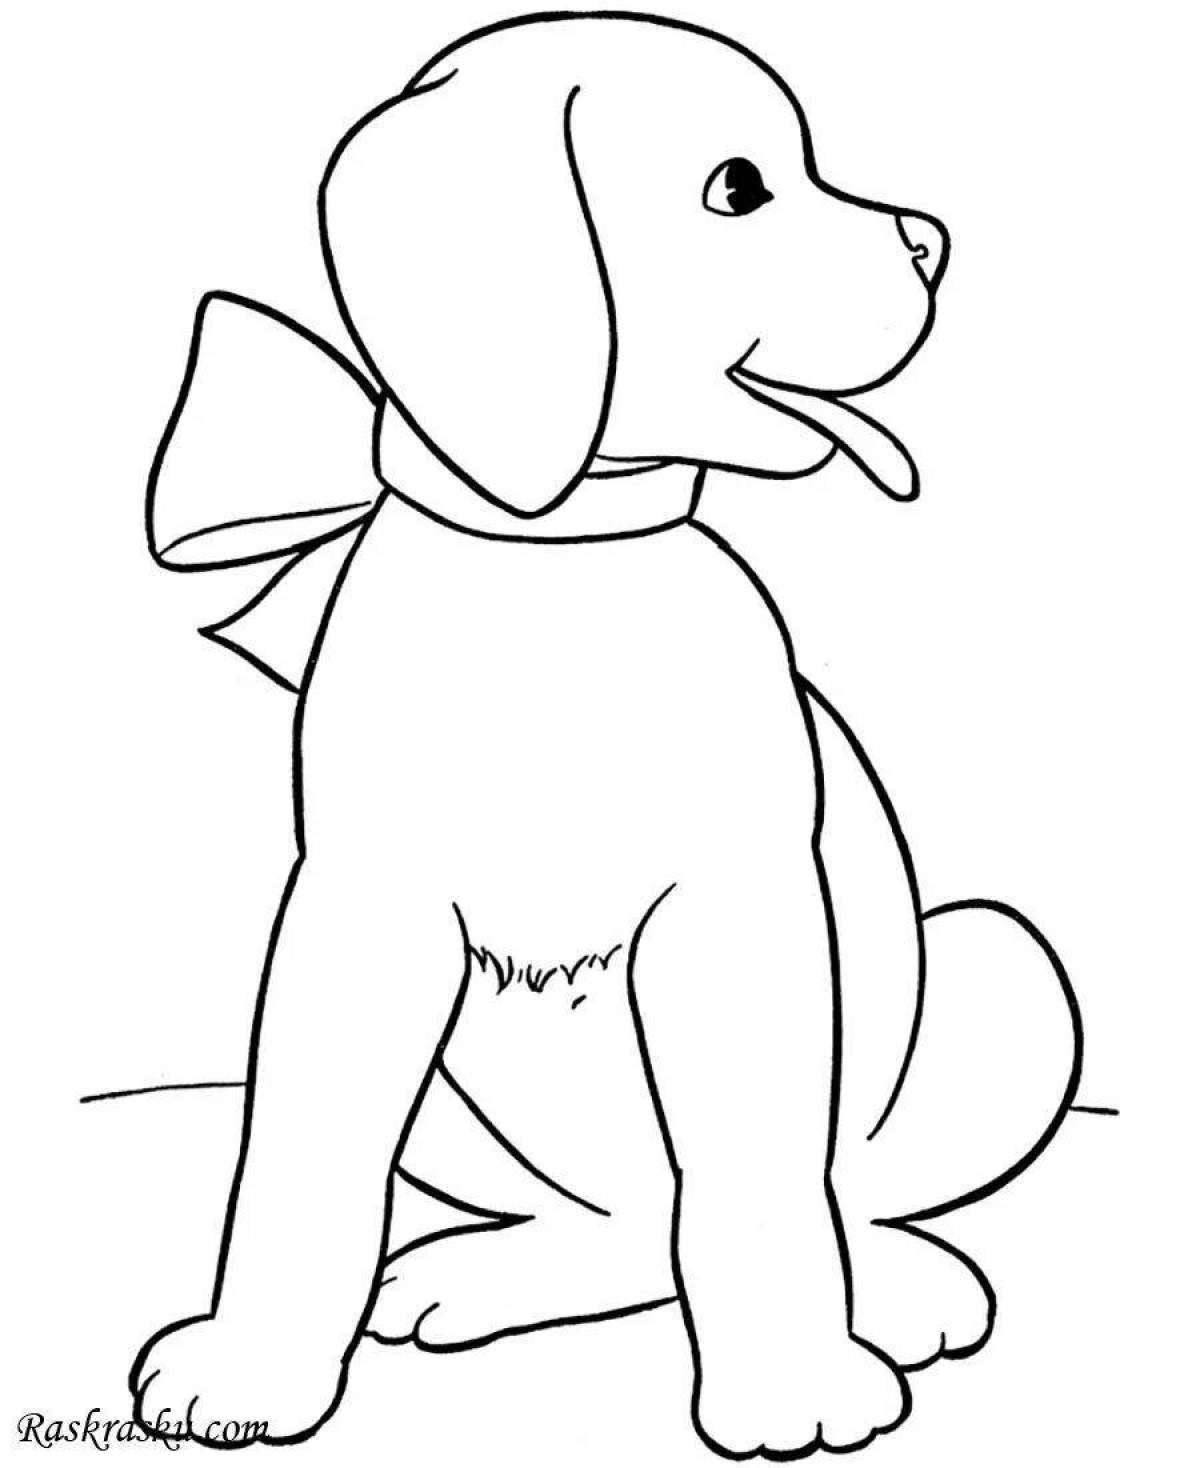 Colorful dog coloring book for 5-6 year olds